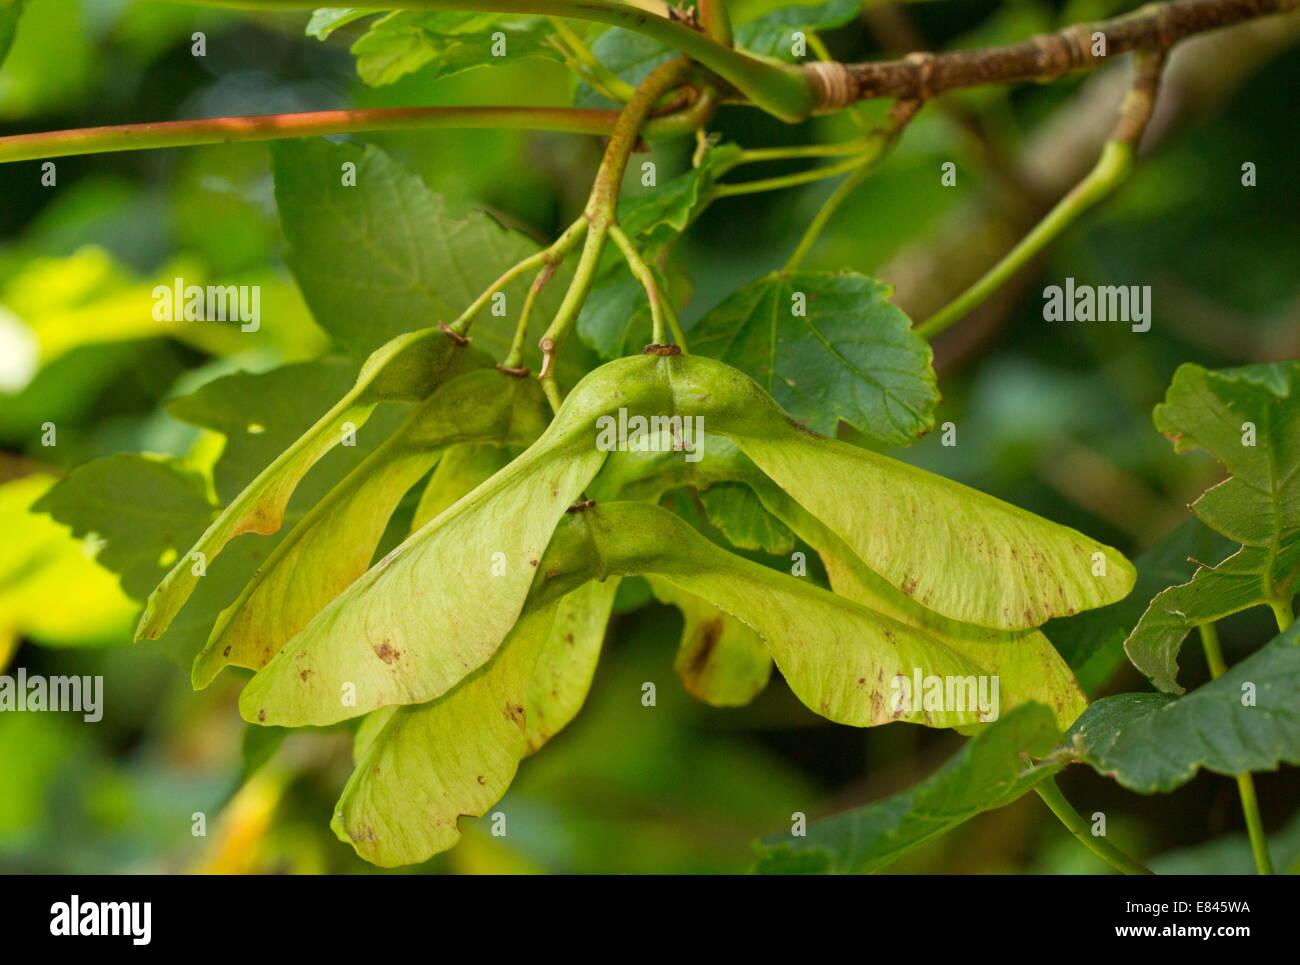 Keys or fruits of Sycamore, Acer pseudoplatanus. Wind-dispersed. Devon. Stock Photo